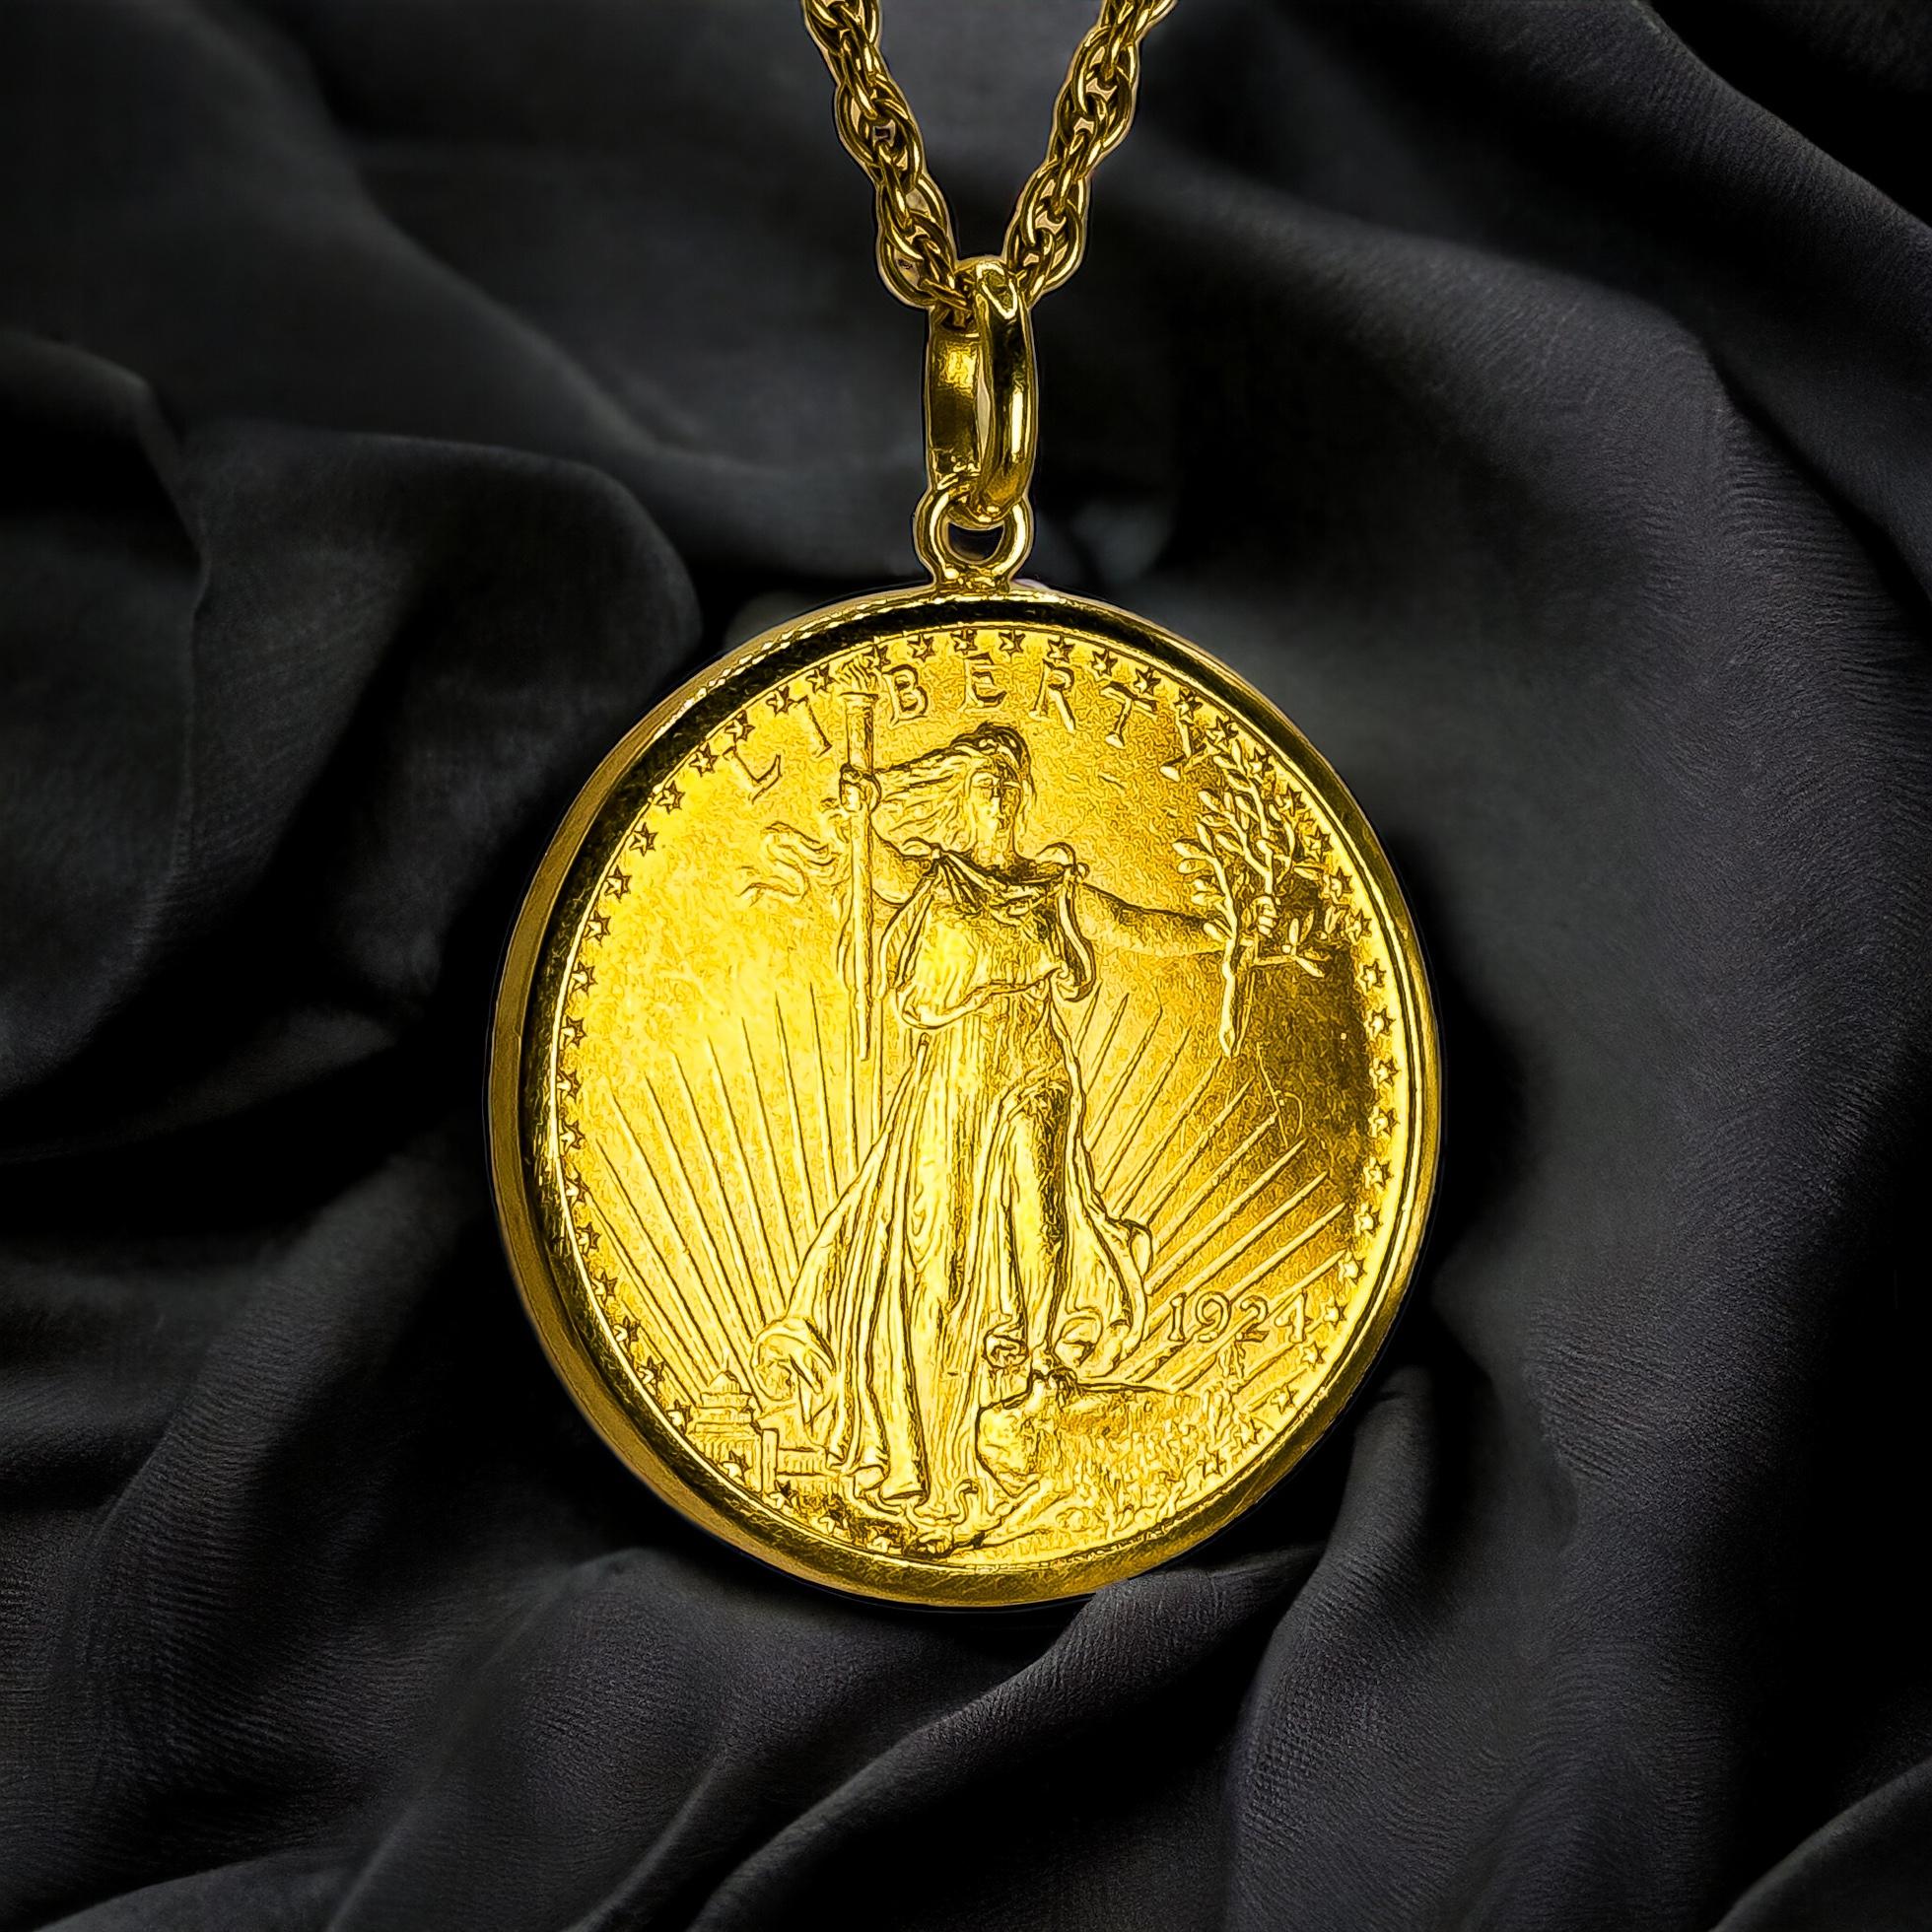 Unveil the Grandeur of Liberty - A Collector's Dream Pendant

This majestic pendant features a 1 oz Liberty gold coin, a treasure of American numismatics, now transformed into a stunning piece of jewelry. Crafted with the finest 18K and 22K solid